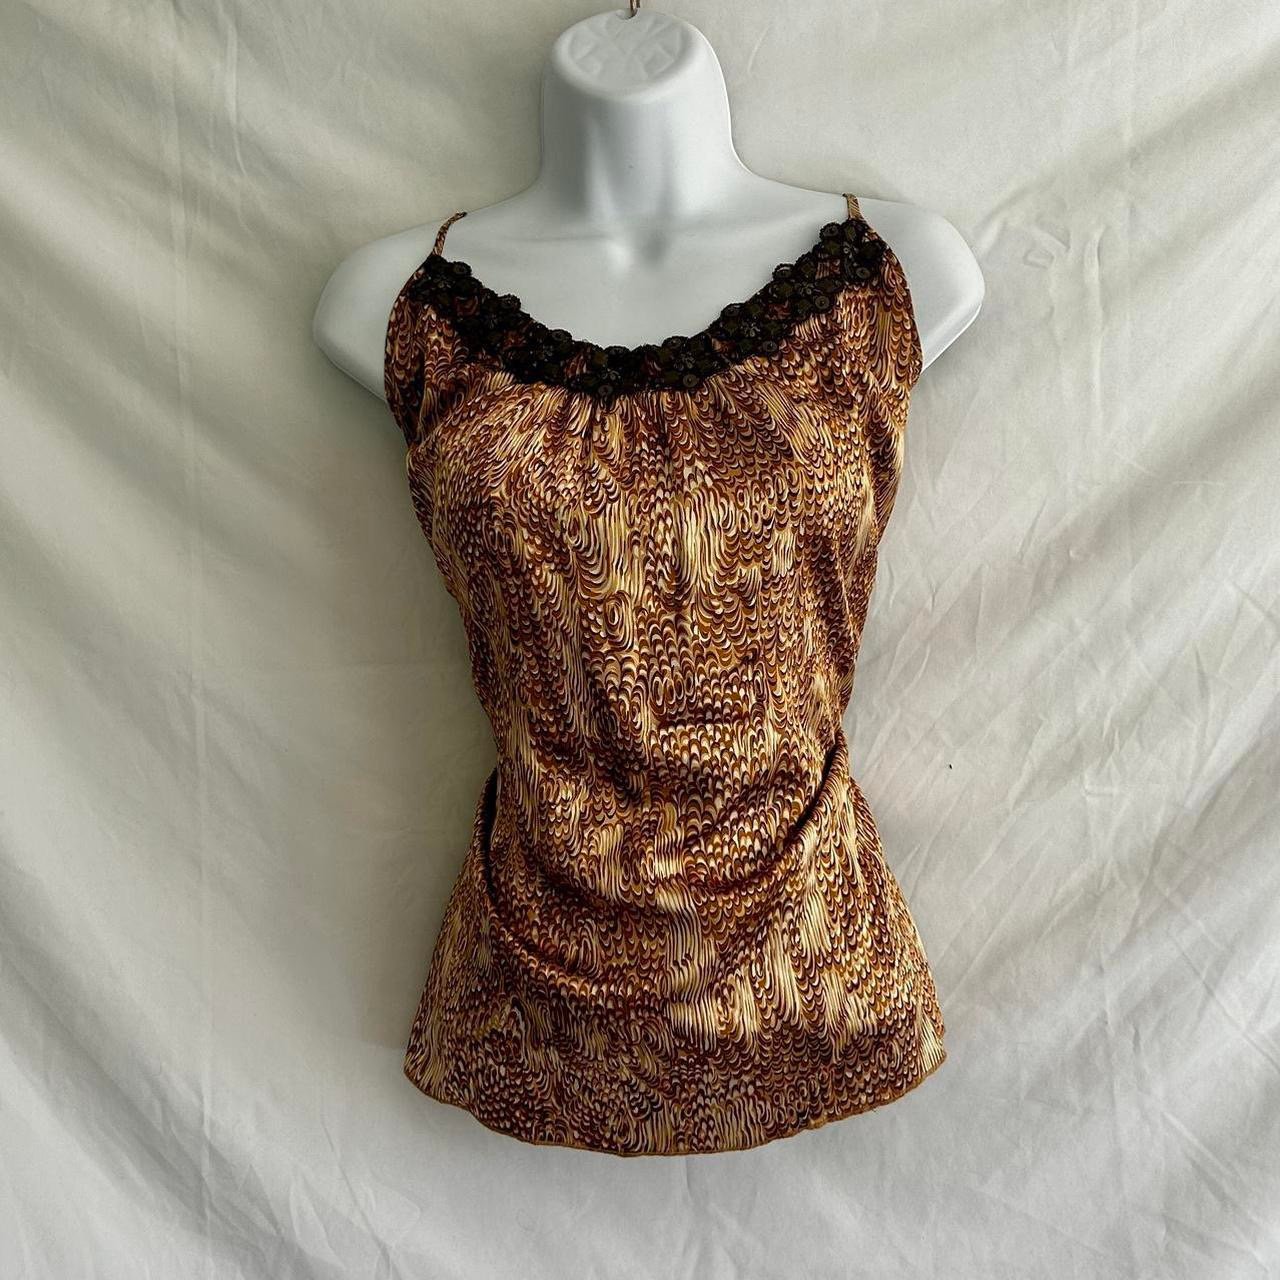 large selection 90s/fairy grunge brown tank gCOW4pA0q E